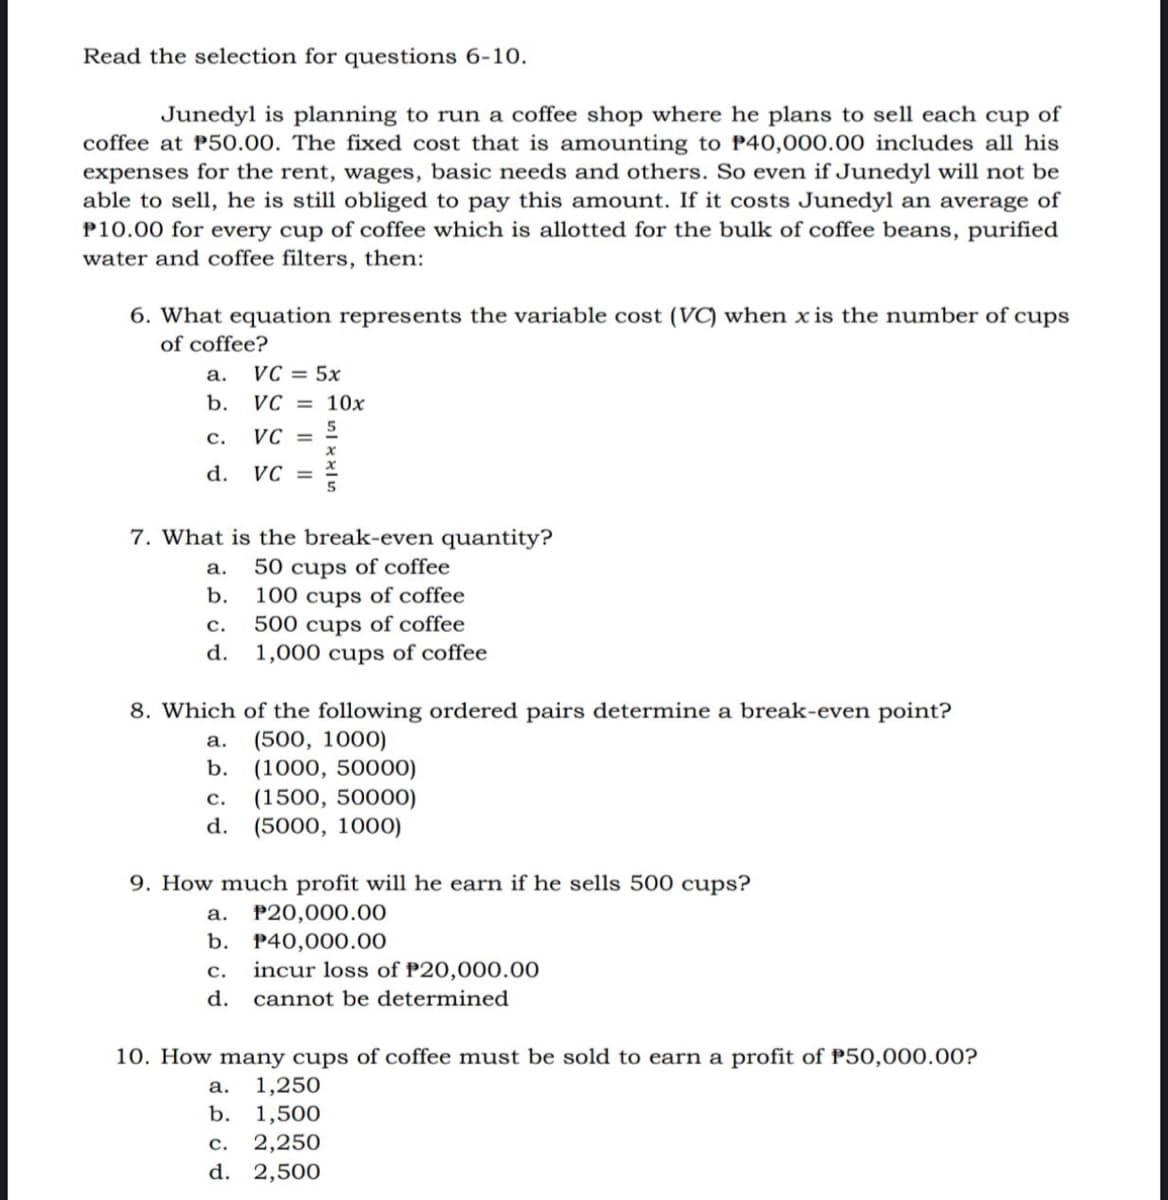 Read the selection for questions 6-10.
Junedyl is planning to run a coffee shop where he plans to sell each cup of
coffee at P50.00. The fixed cost that is amounting to P40,000.00 includes all his
expenses for the rent, wages, basic needs and others. So even if Junedyl will not be
able to sell, he is still obliged to pay this amount. If it costs Junedyl an average of
P10.00 for every cup of coffee which is allotted for the bulk of coffee beans, purified
water and coffee filters, then:
6. What equation represents the variable cost (VC) when x is the number of cups
of coffee?
а.
VC = 5x
b.
VC = 10x
5.
VC =
с.
d.
VC =
7. What is the break-even quantity?
50 cups of coffee
100 cups of coffee
500 cups of coffee
1,000 cups of coffee
а.
b.
с.
d.
8. Which of the following ordered pairs determine a break-even point?
(500, 1000)
(1000, 50000)
(1500, 50000)
(5000, 1000)
a.
b.
с.
d.
9. How much profit will he earn if he sells 500 cups?
а.
P20,000.00
b. P40,000.00
incur loss of P20,000.00
с.
d.
cannot be determined
10. How many cups of coffee must be sold to earn a profit of P50,000.00?
1,250
b. 1,500
а.
2,250
d. 2,500
с.
